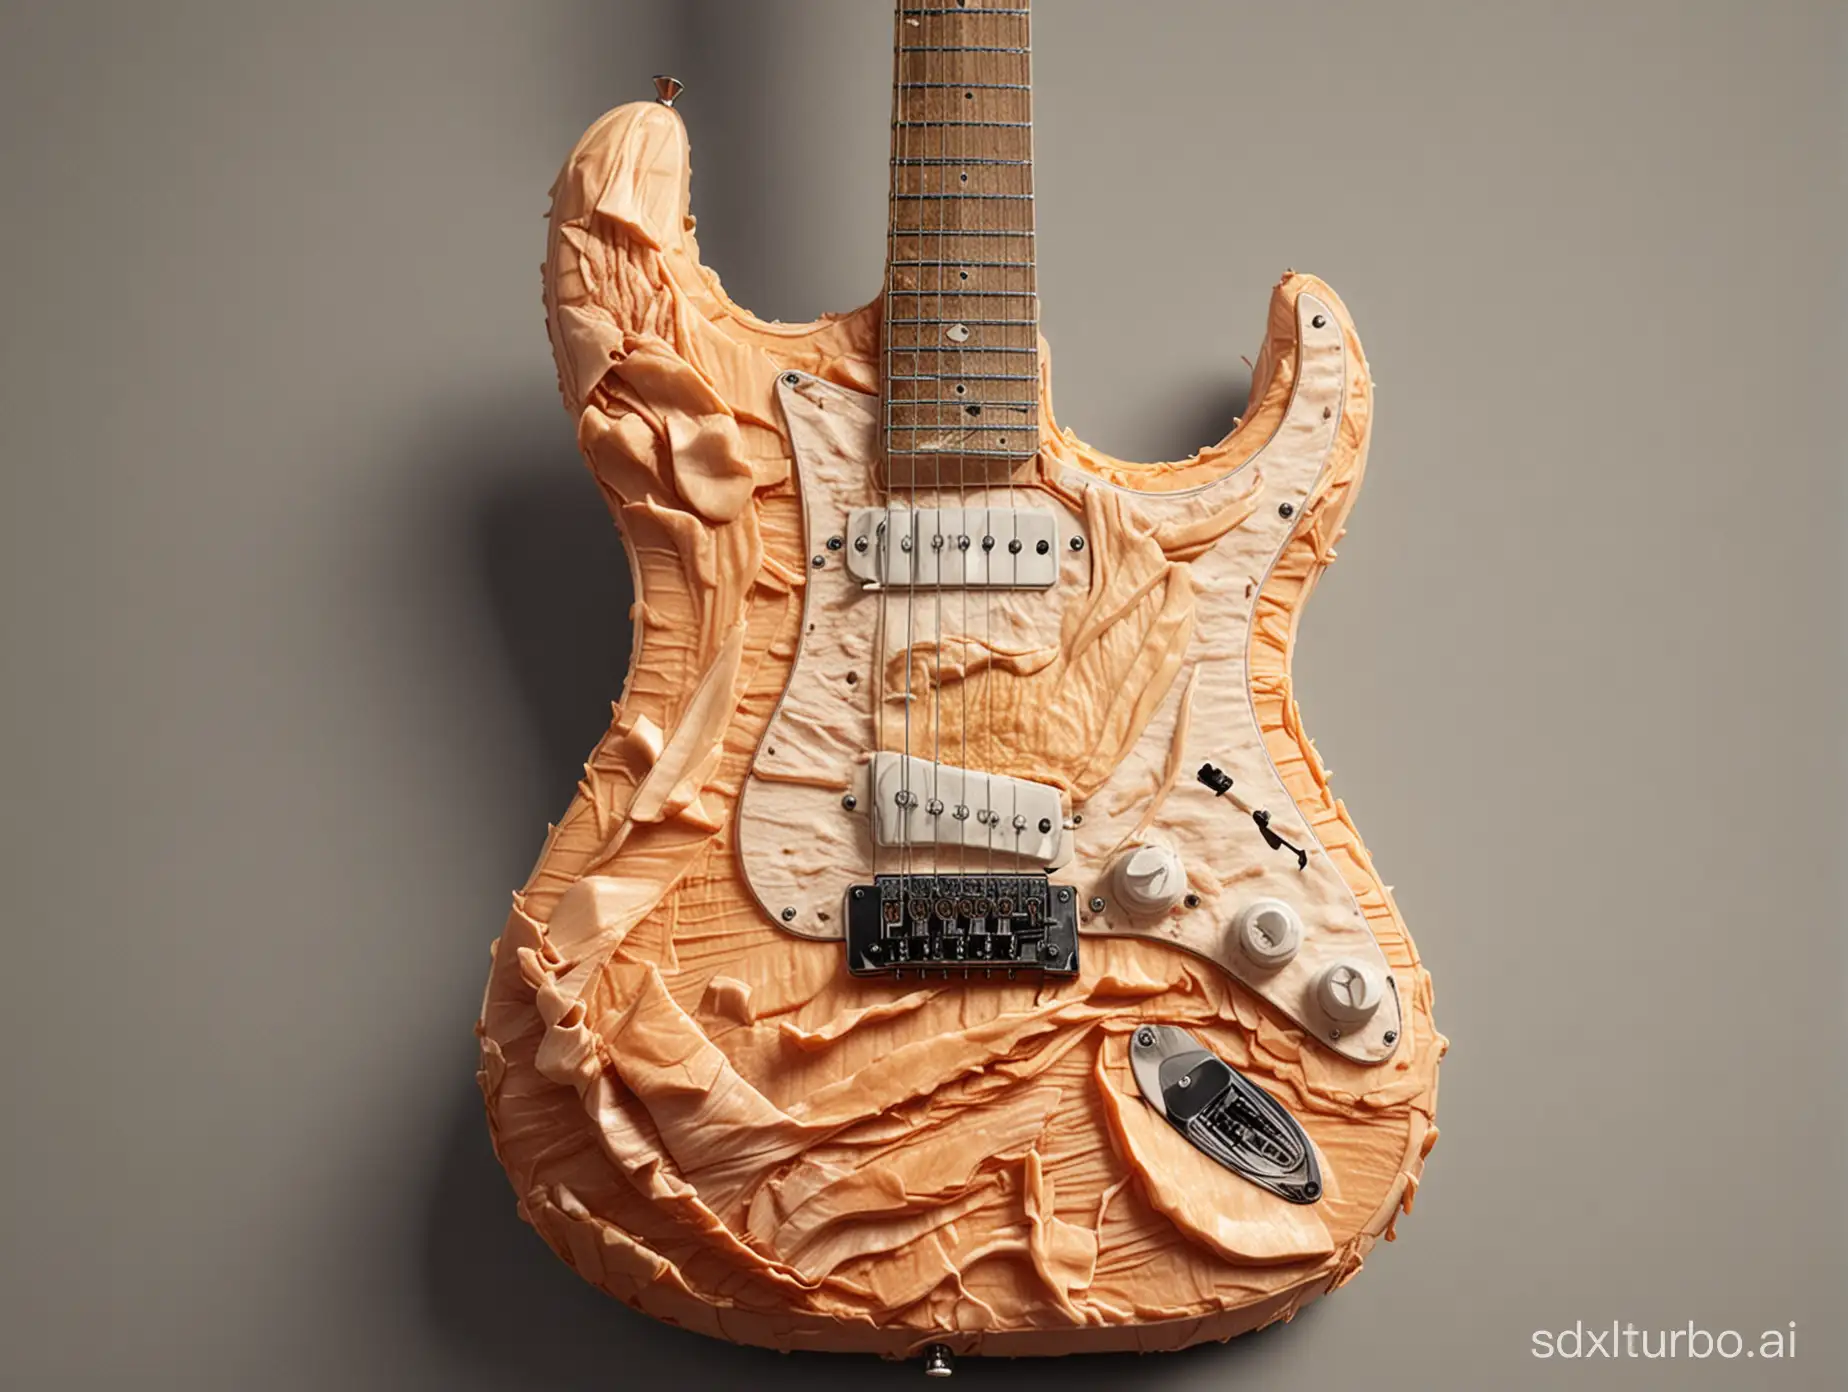 An electric guitar with a body made out of raw plucked un cooked chicken skin super realistic rendition